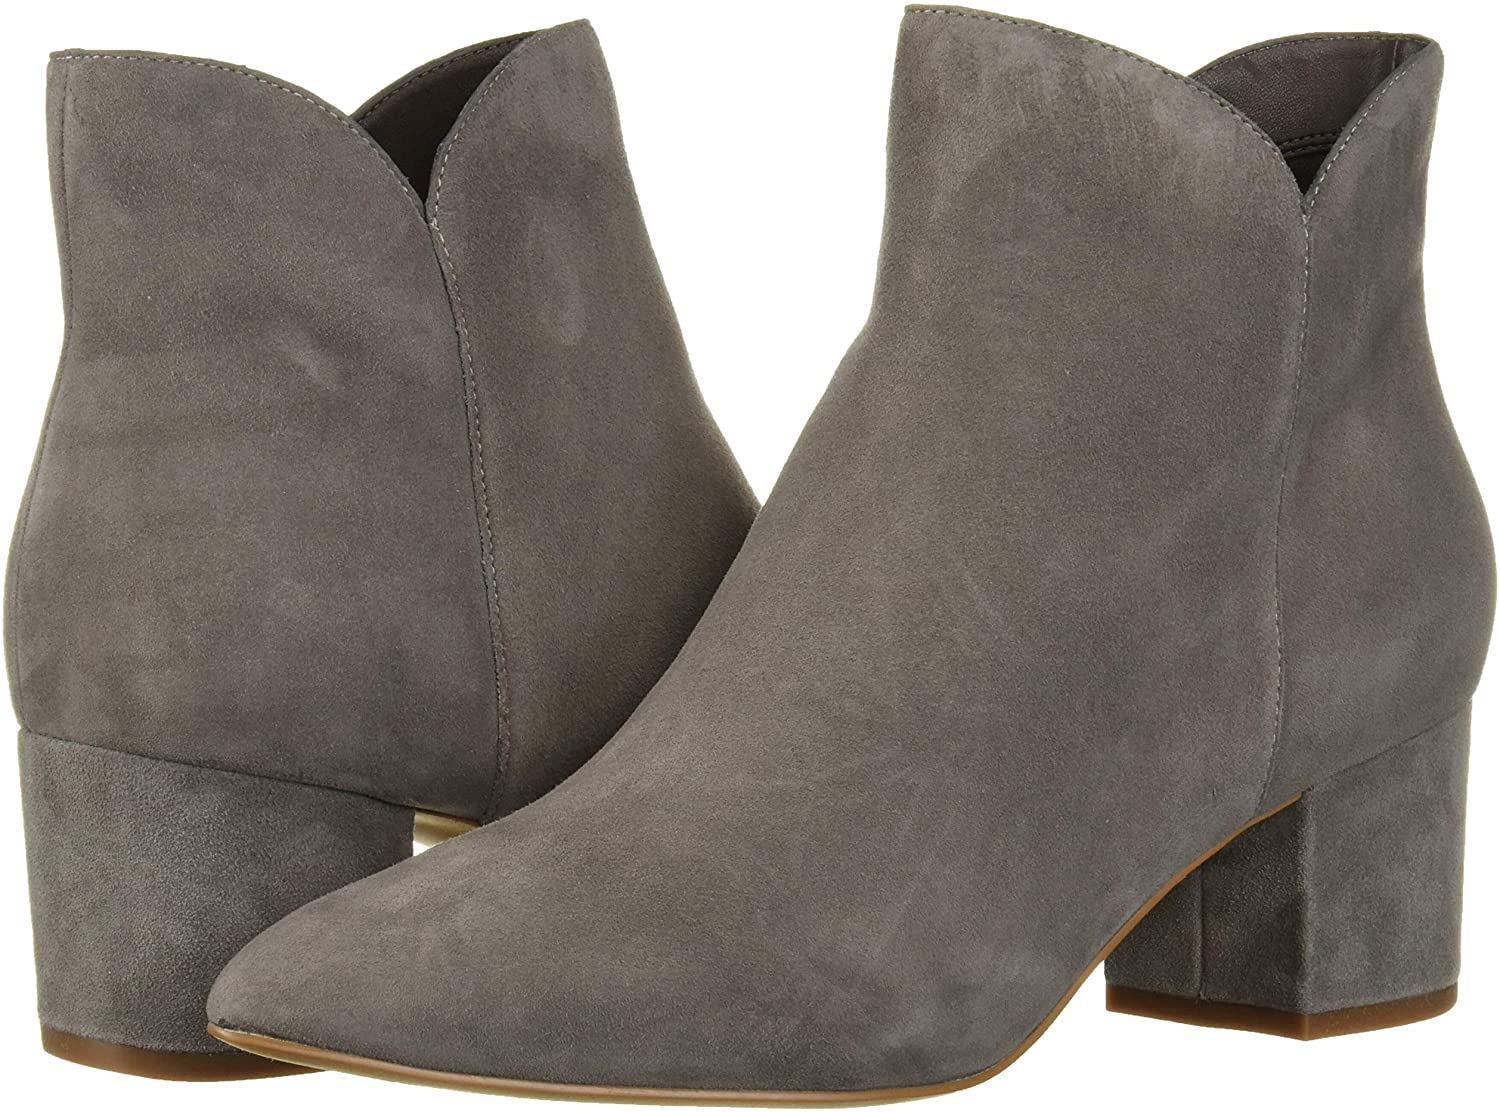 Cole Haan Womens Shoes Elyse Bootie Pointed Toe Ankle 